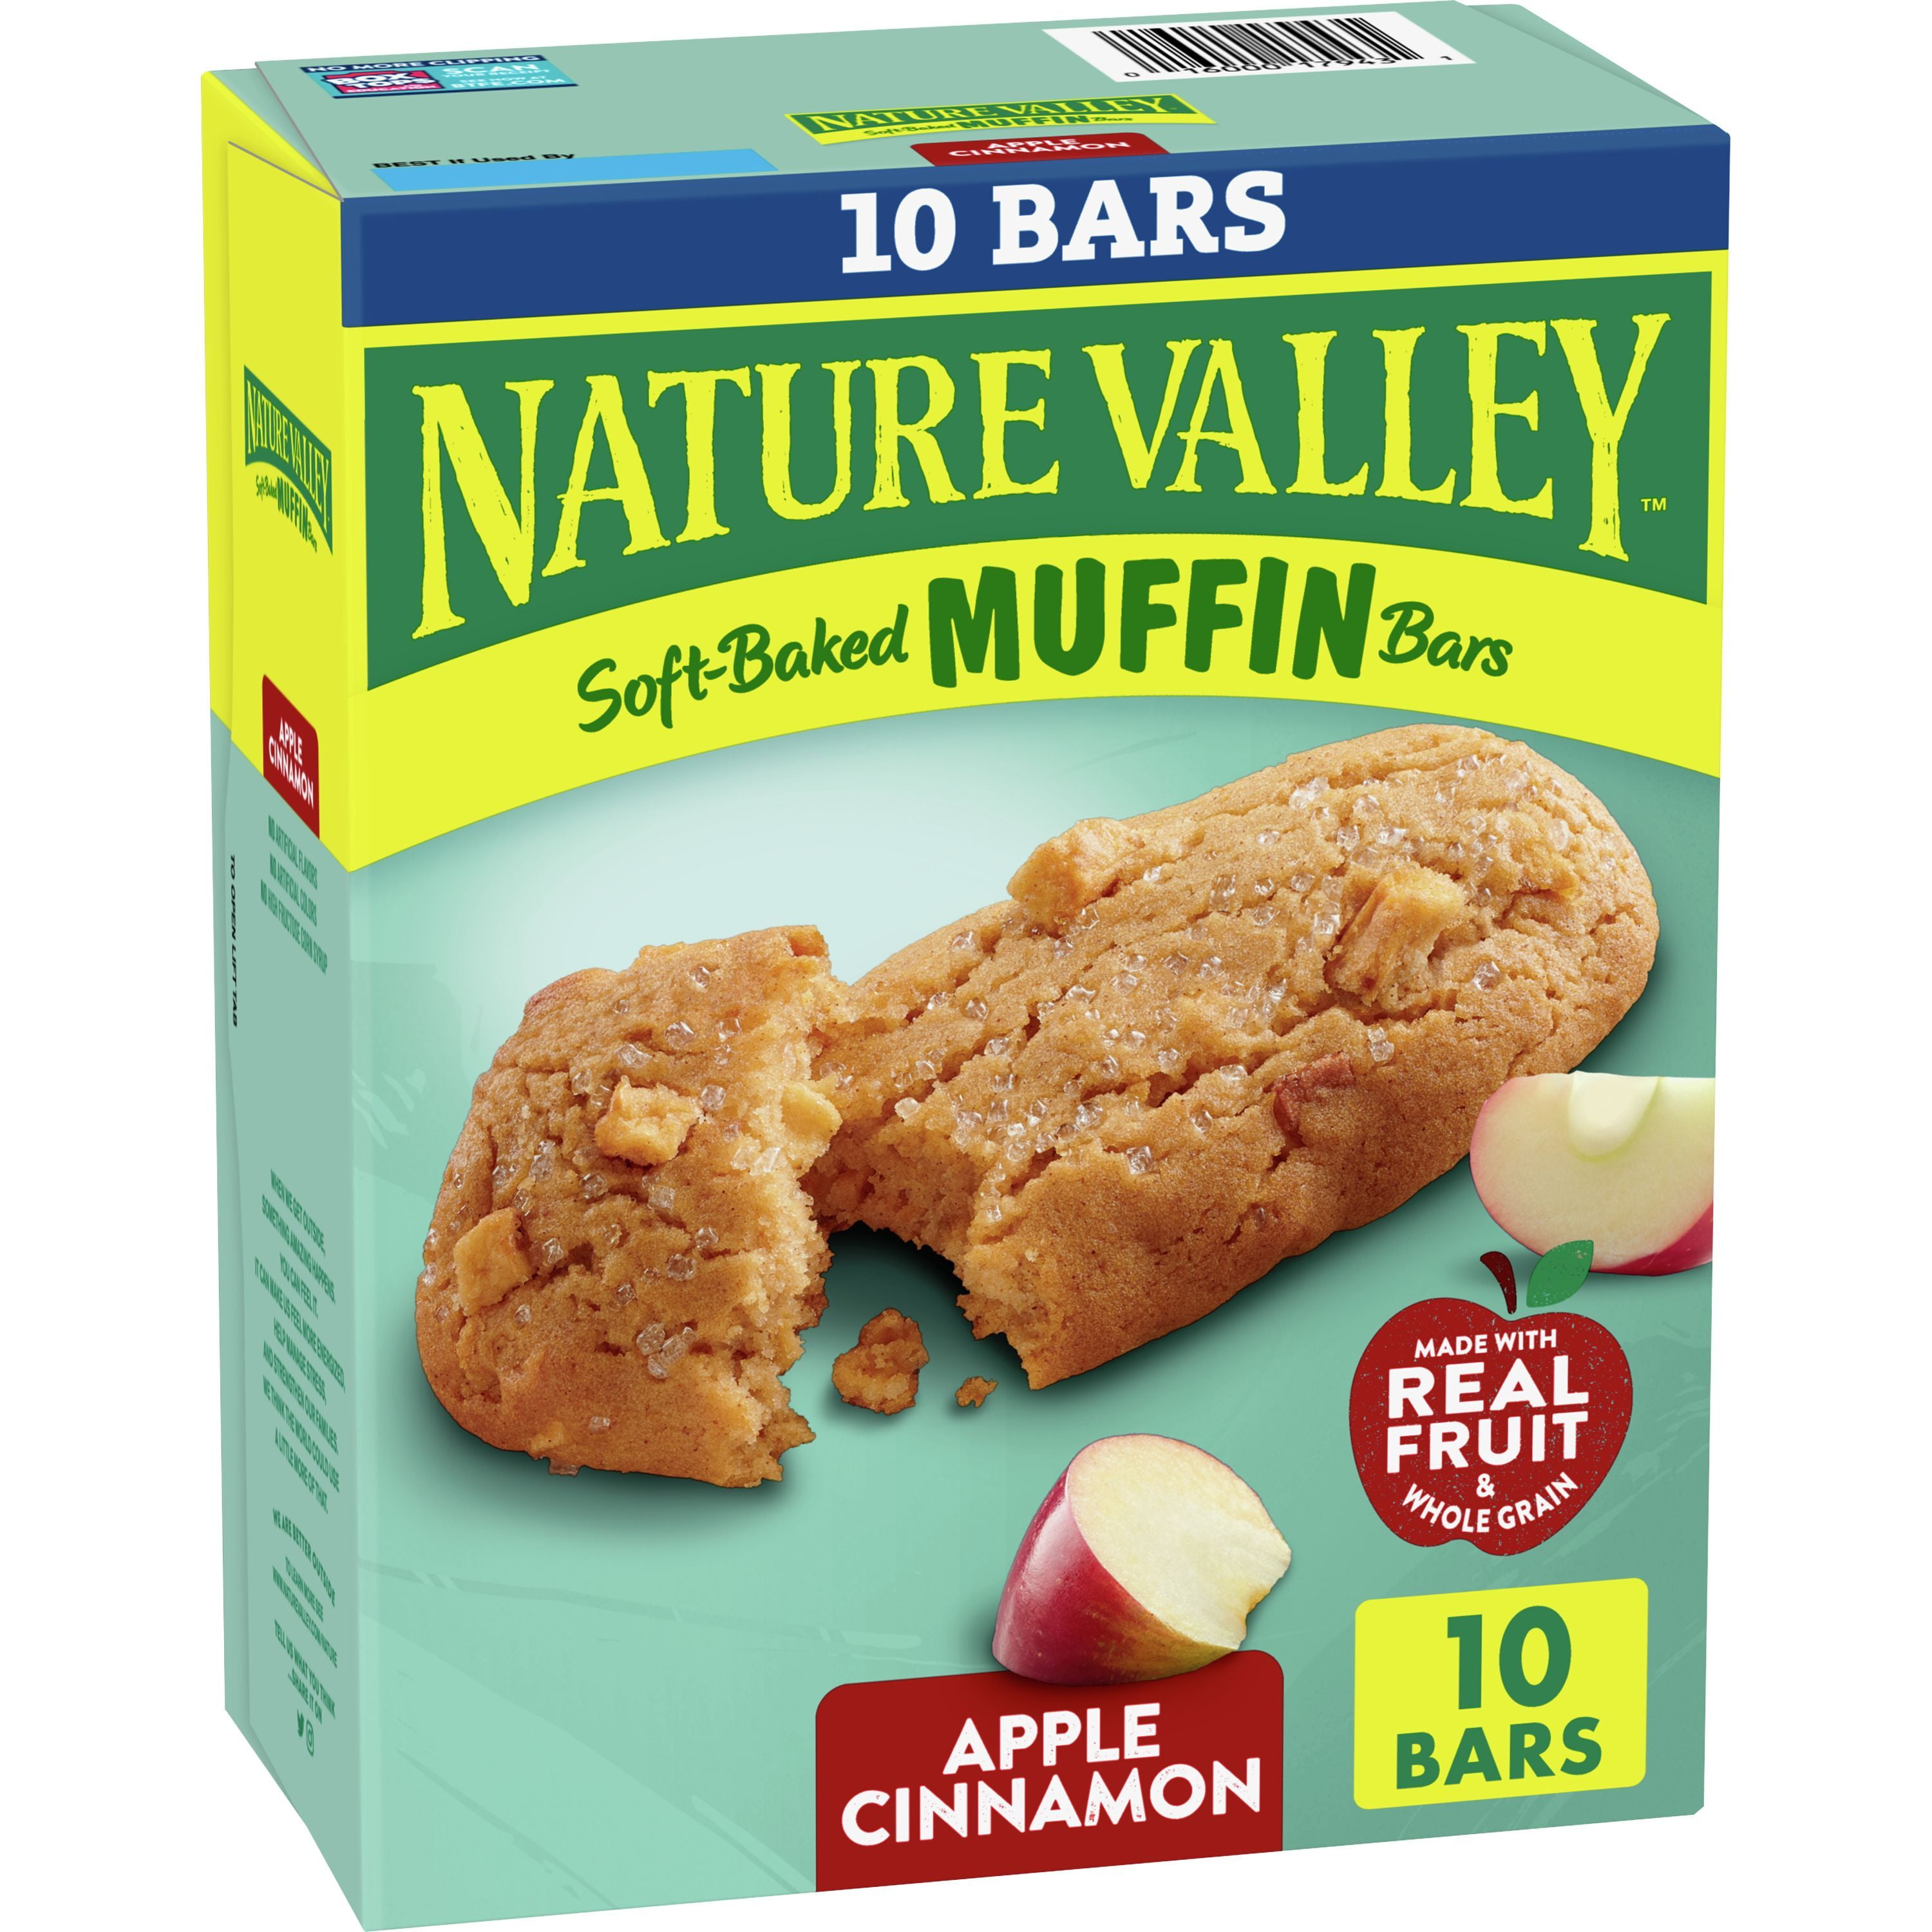 Nature Valley Soft-Baked Muffin Bars, Apple Cinnamon, Snack Bars, 10 ct